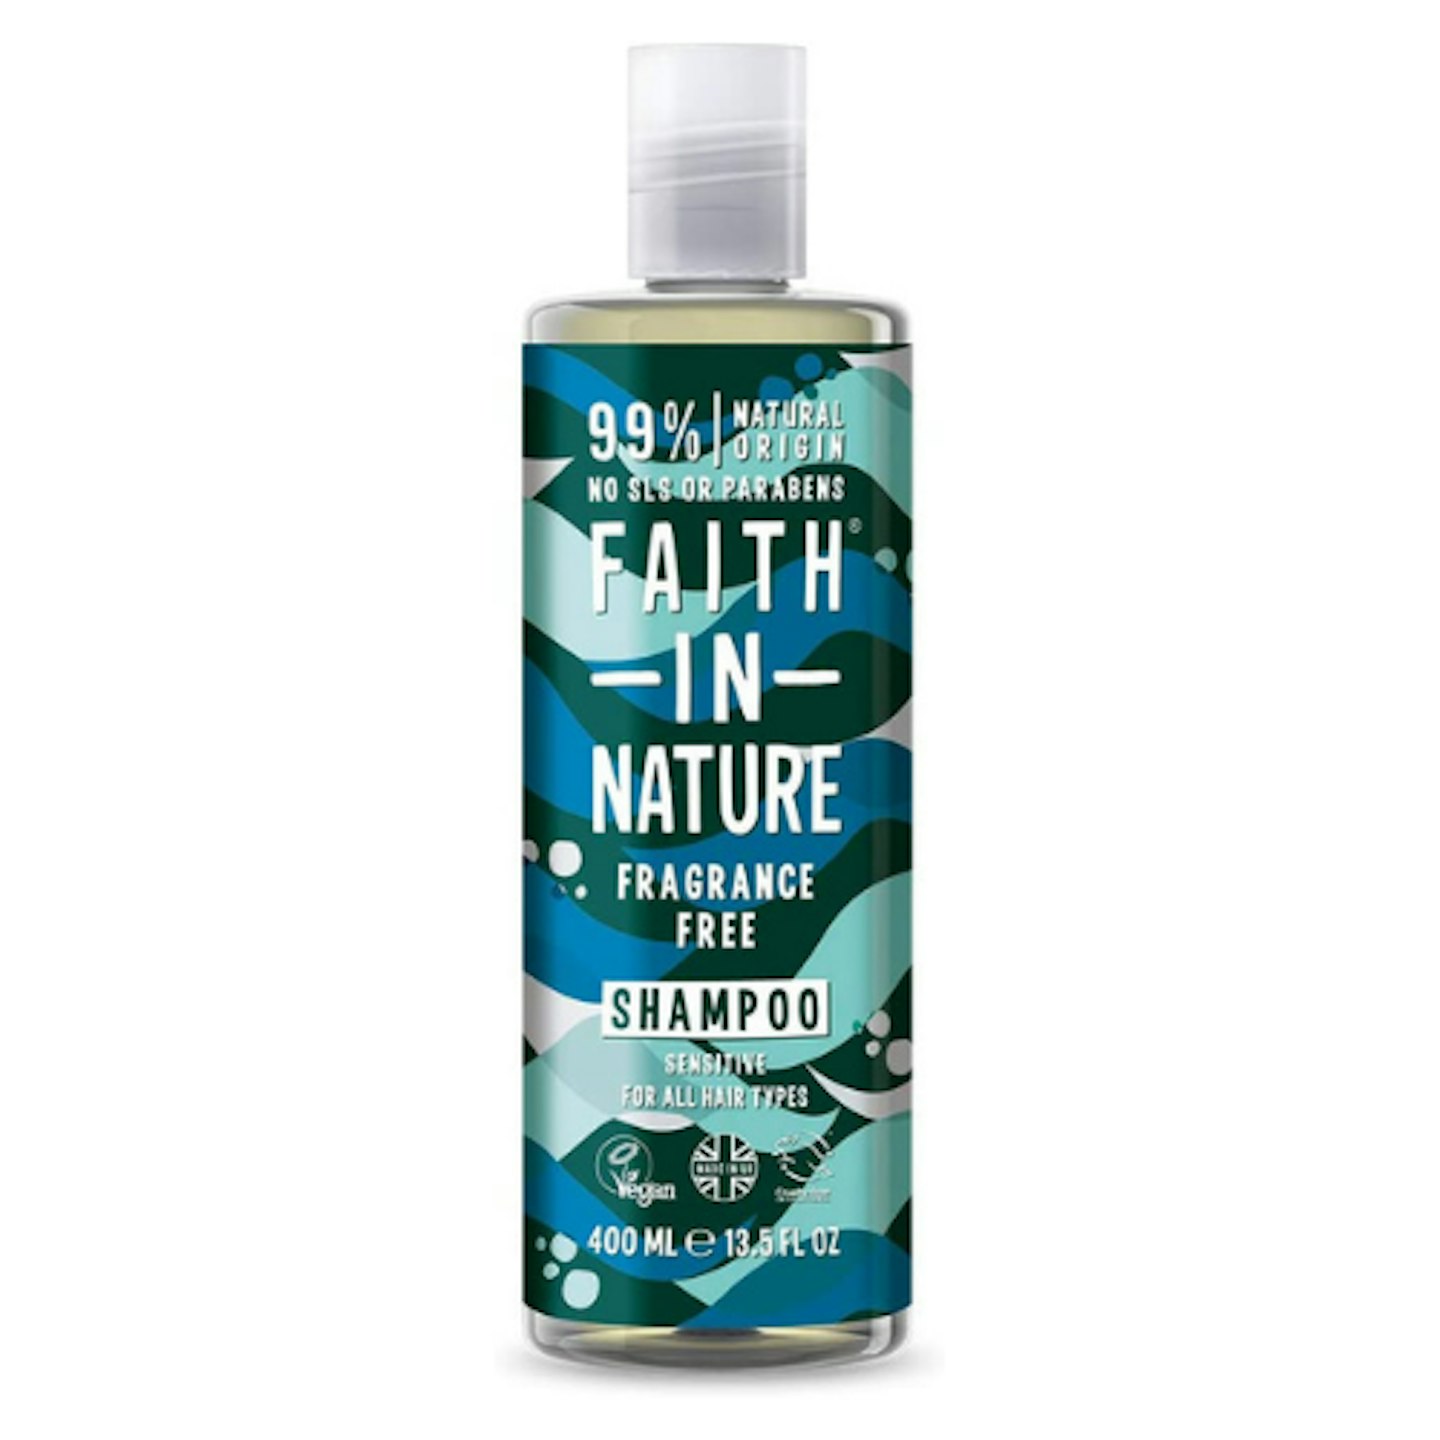 Faith in Nature Natural Fragrance Free Shampoo on white background